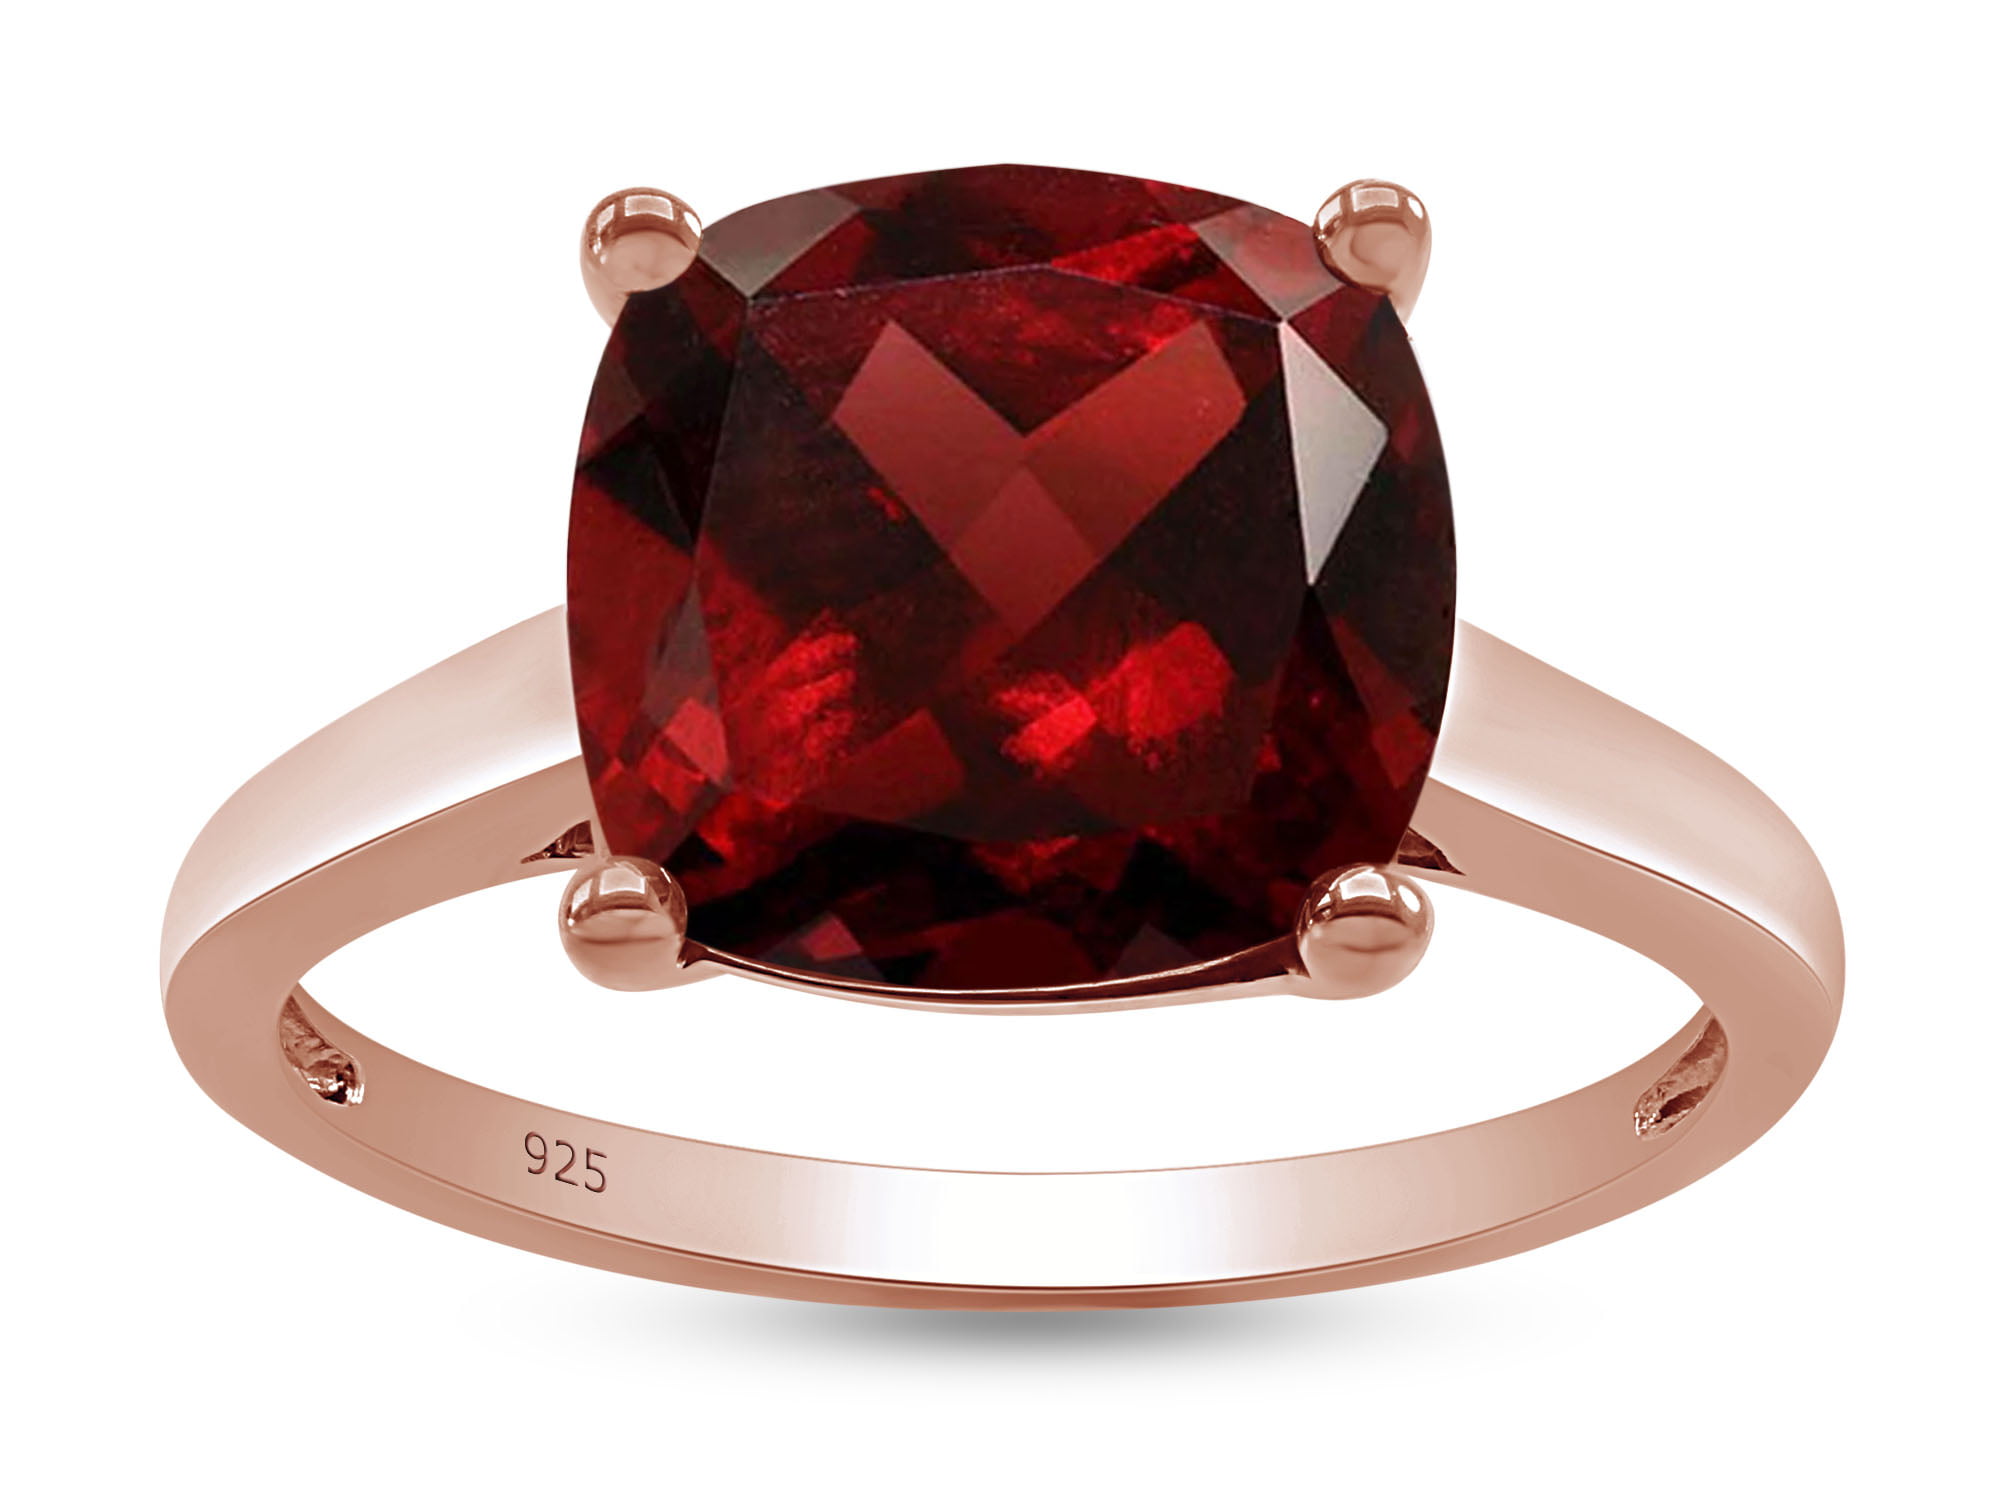 5 Ct Cushion Cut Simulated Garnet Solitaire Ring in 14k Rose Gold